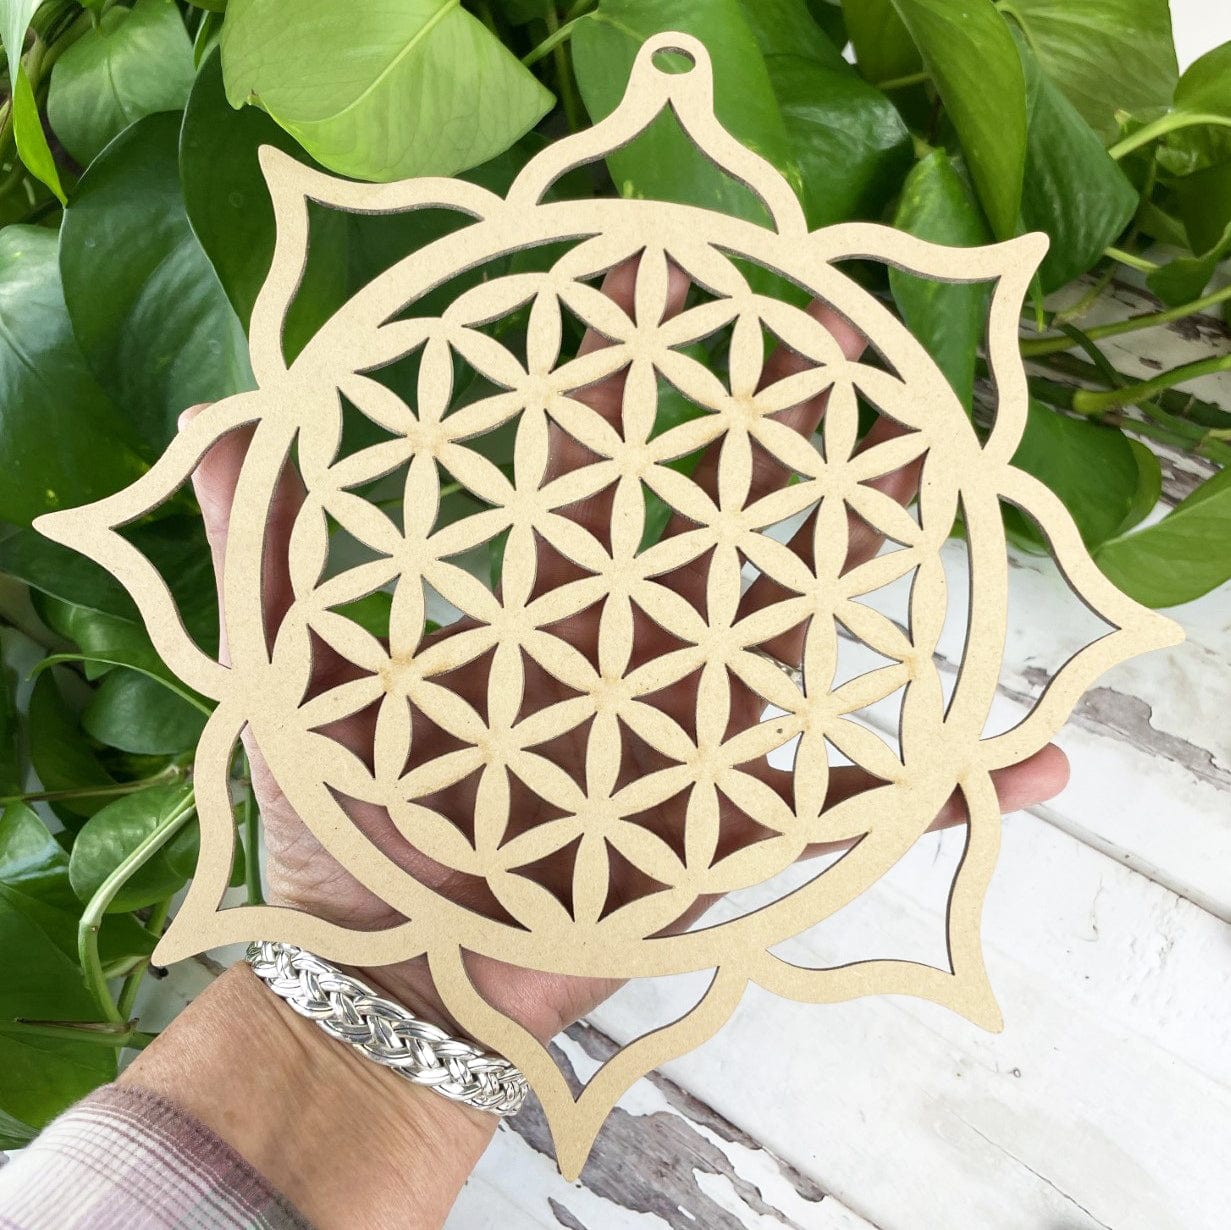 Crystal Grid - Flower of Life and Lotus Design in a hand for sizing